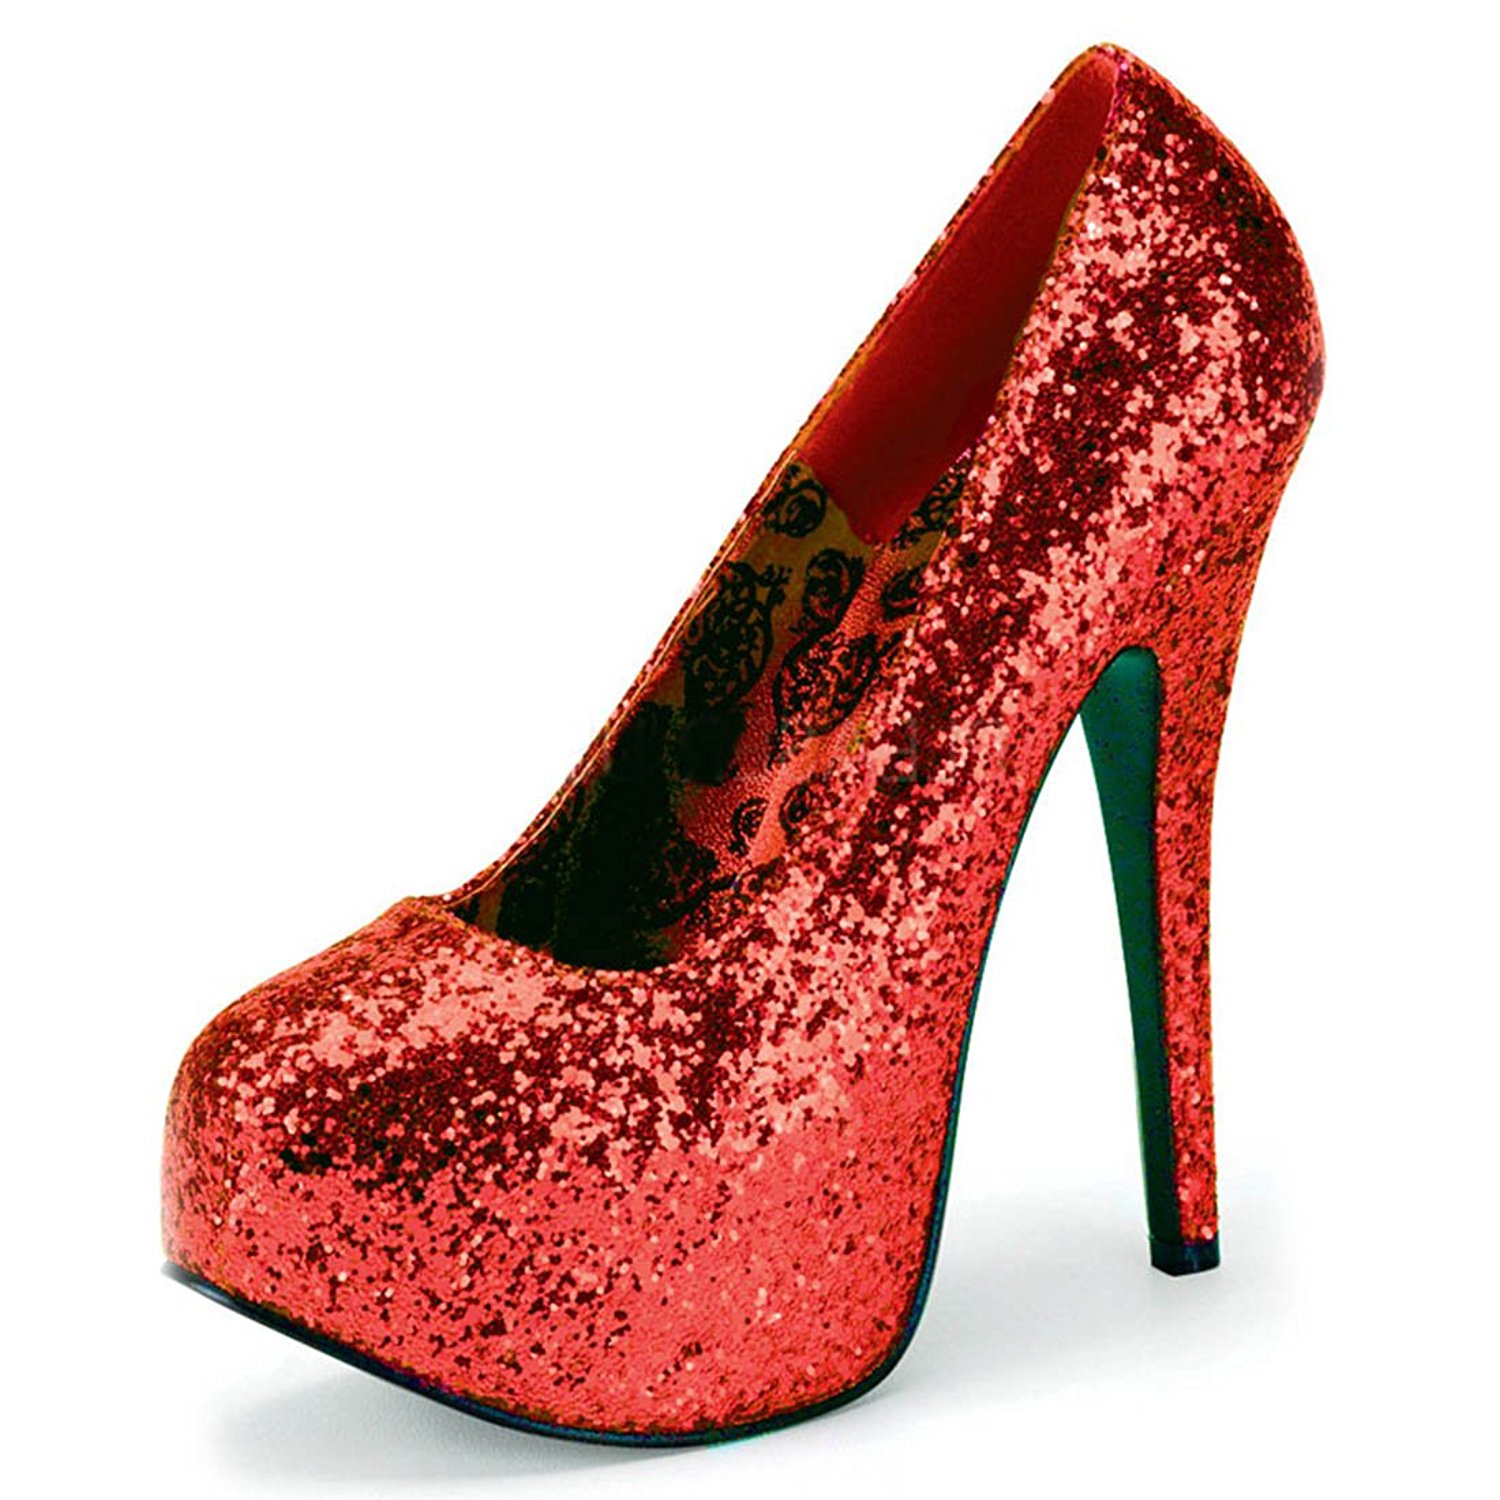 sparkly heels amazon.com | glimmering red glitter heels womenu0027s platform pumps with 5.75  inch romcaxo